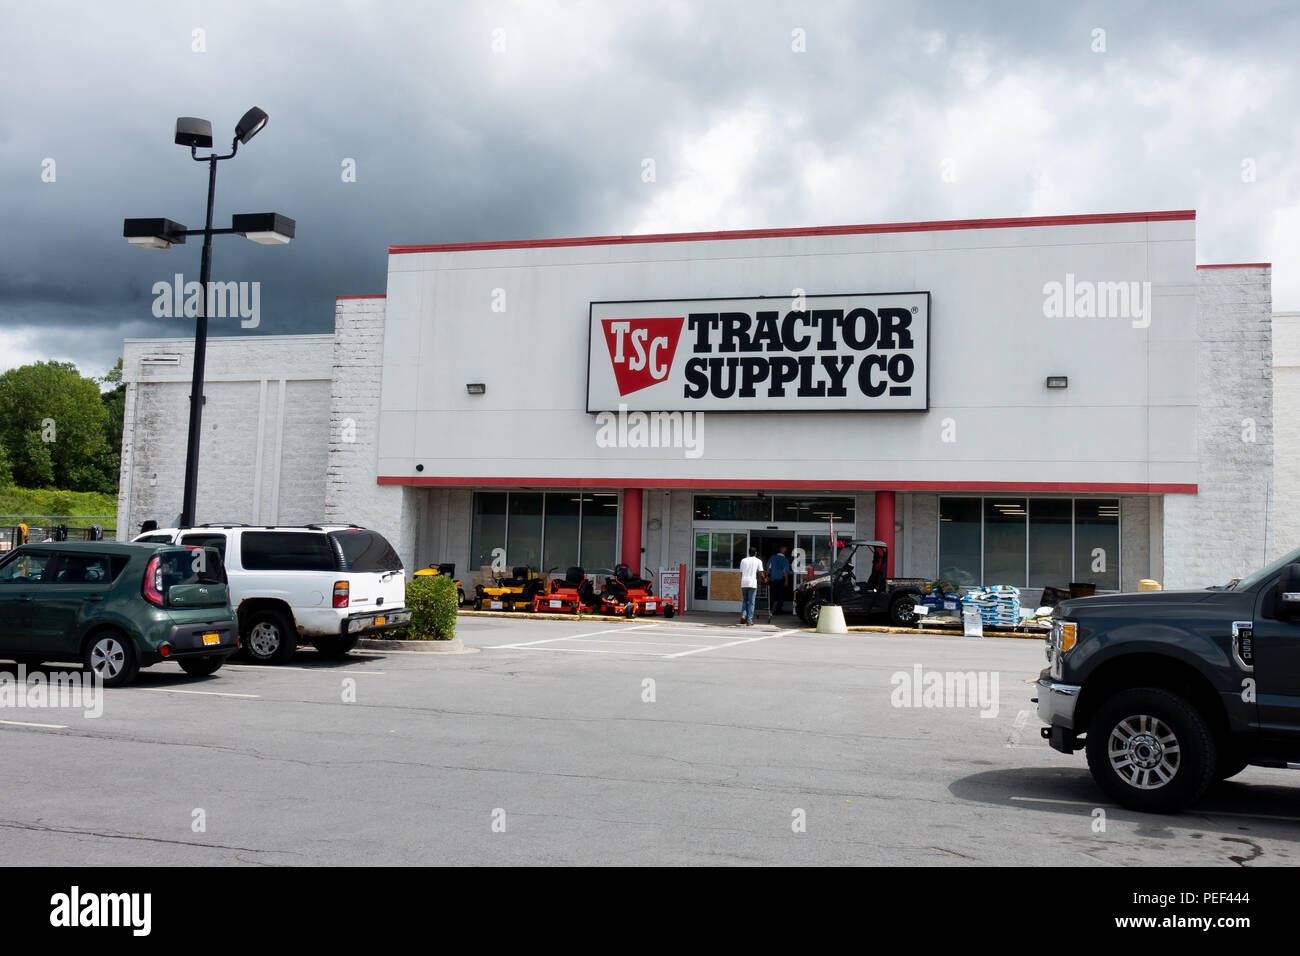 A Tractor Supply Co store in Utica, NY USA with vehicles and customers in the parking lot and merchandise on display on the sidewalk. Stock Photo